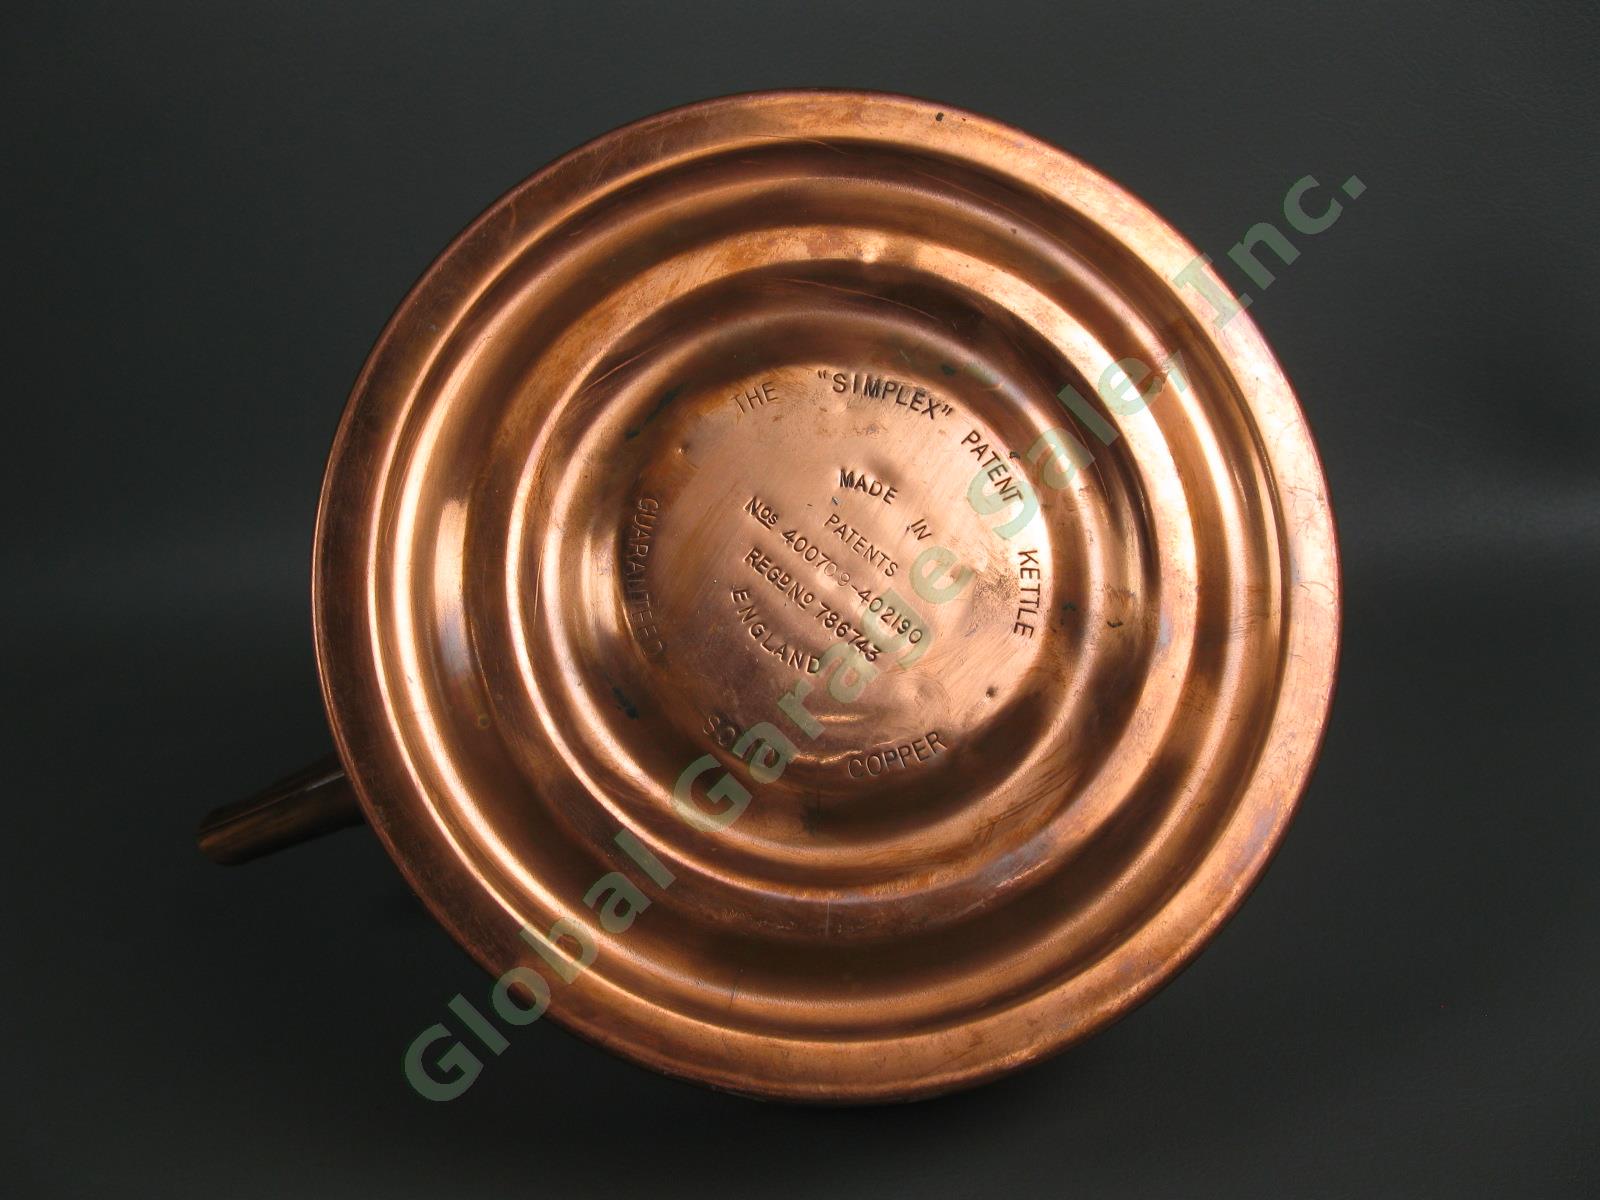 Vintage Simplex Patent Solid Copper Whistling Water Tea Kettle England 400709 NR 1